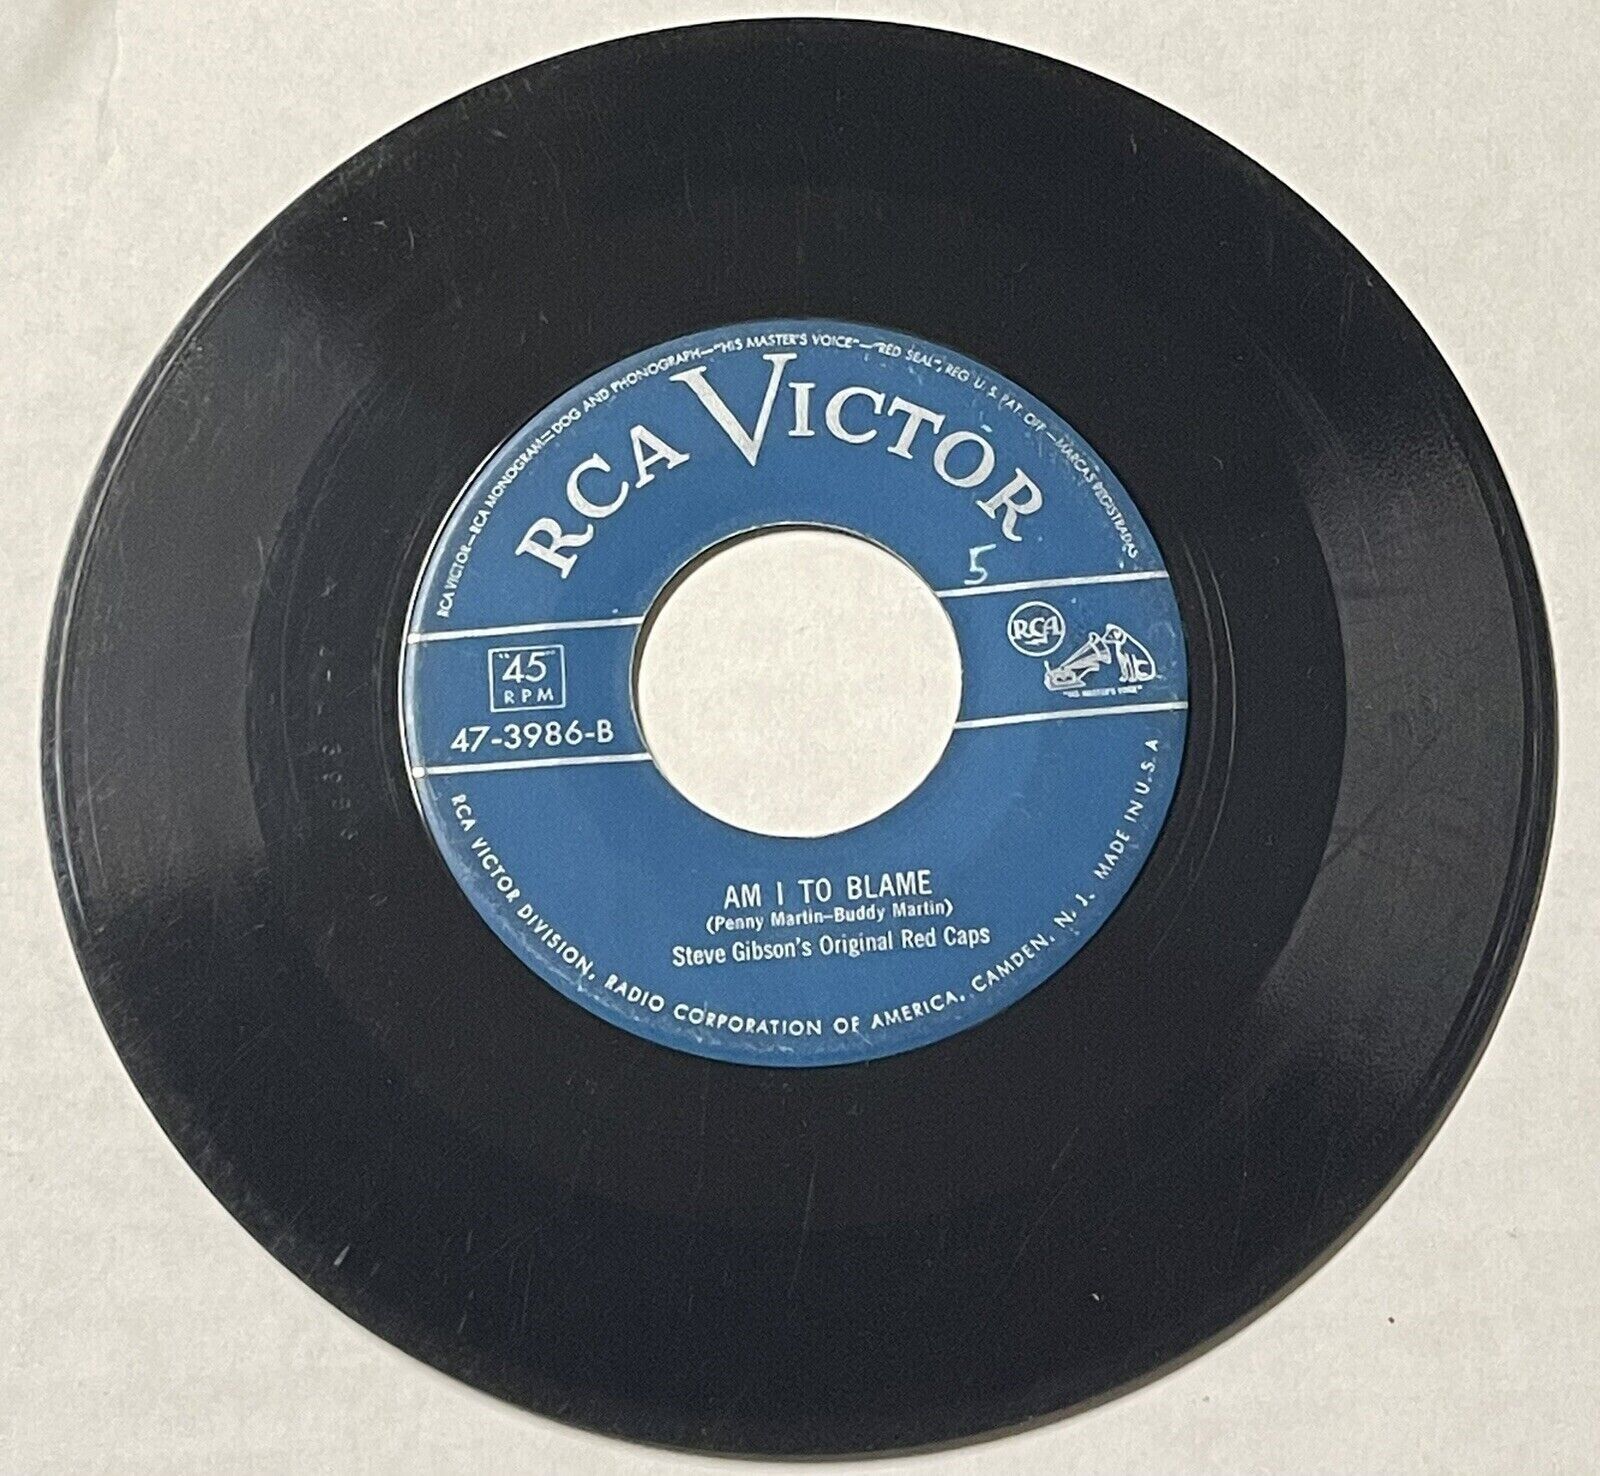 Steve Gibson's Red Caps 1950 DOO WOP 45 Am I To Blame / The Thing RCA VG HEAR